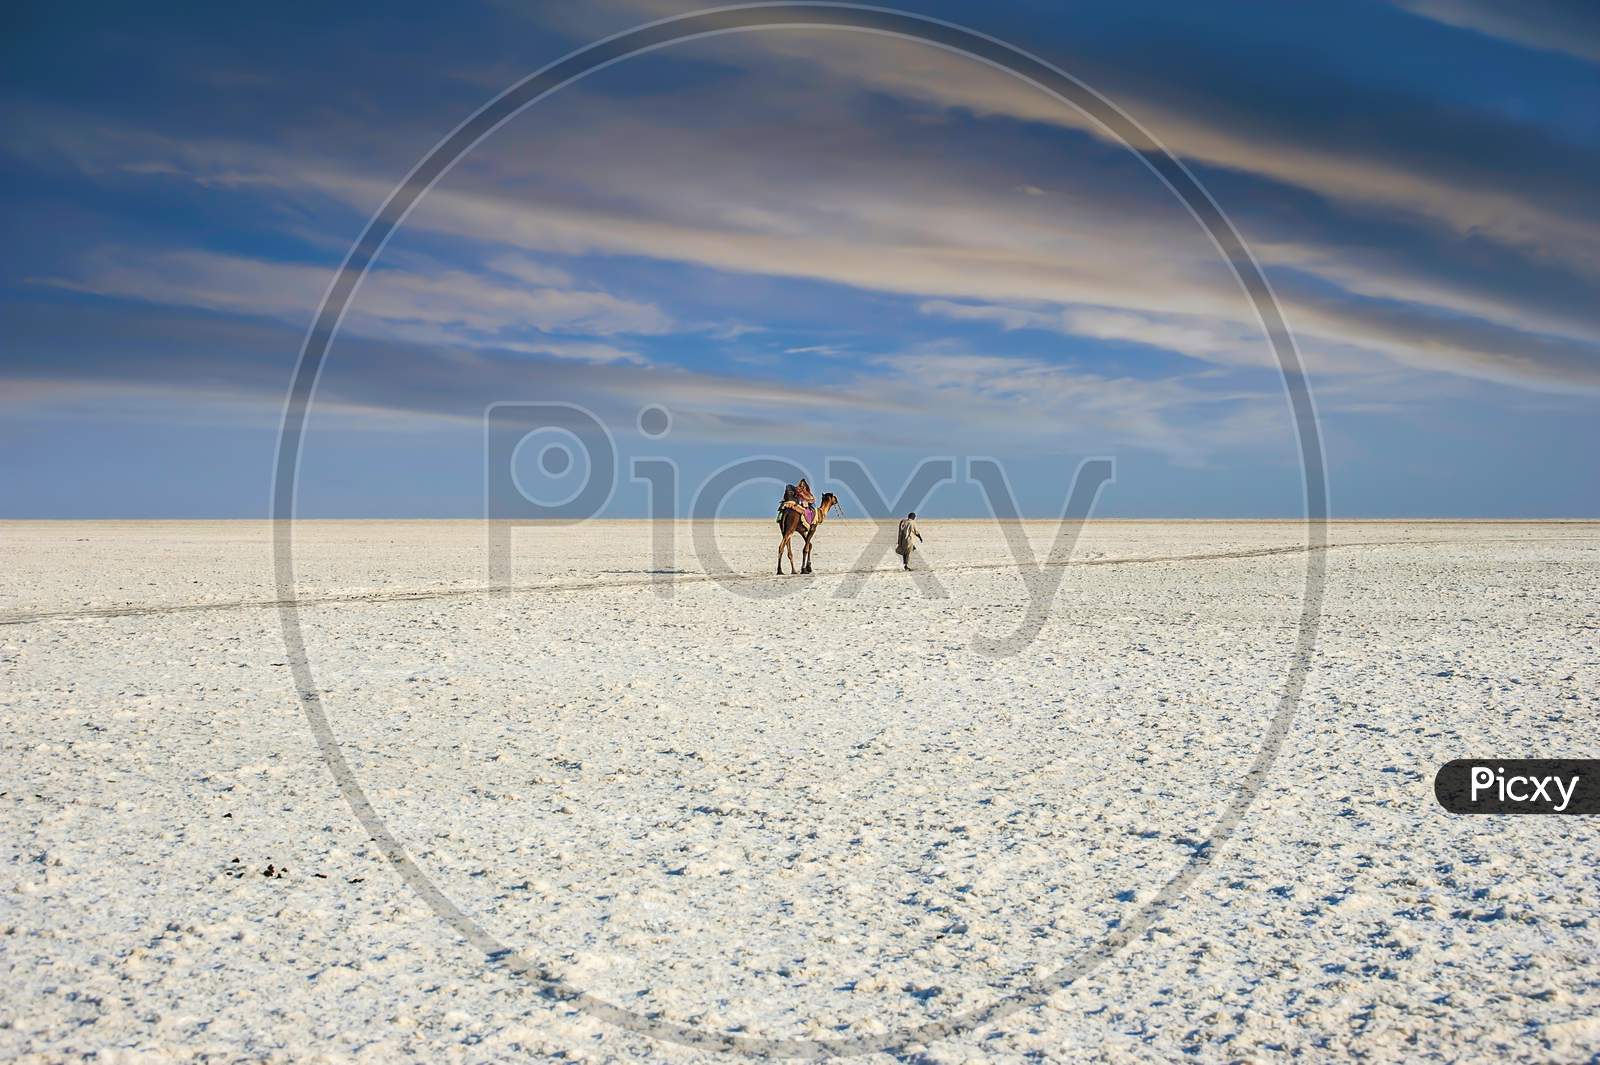 Centuries-Old Traditions Wrapped With Spectacular Nature Define The Kutch Region In Gujarat. Better Known As The Rann Of Kutch, It Is A Big Flooded Grasslands Zone In India.